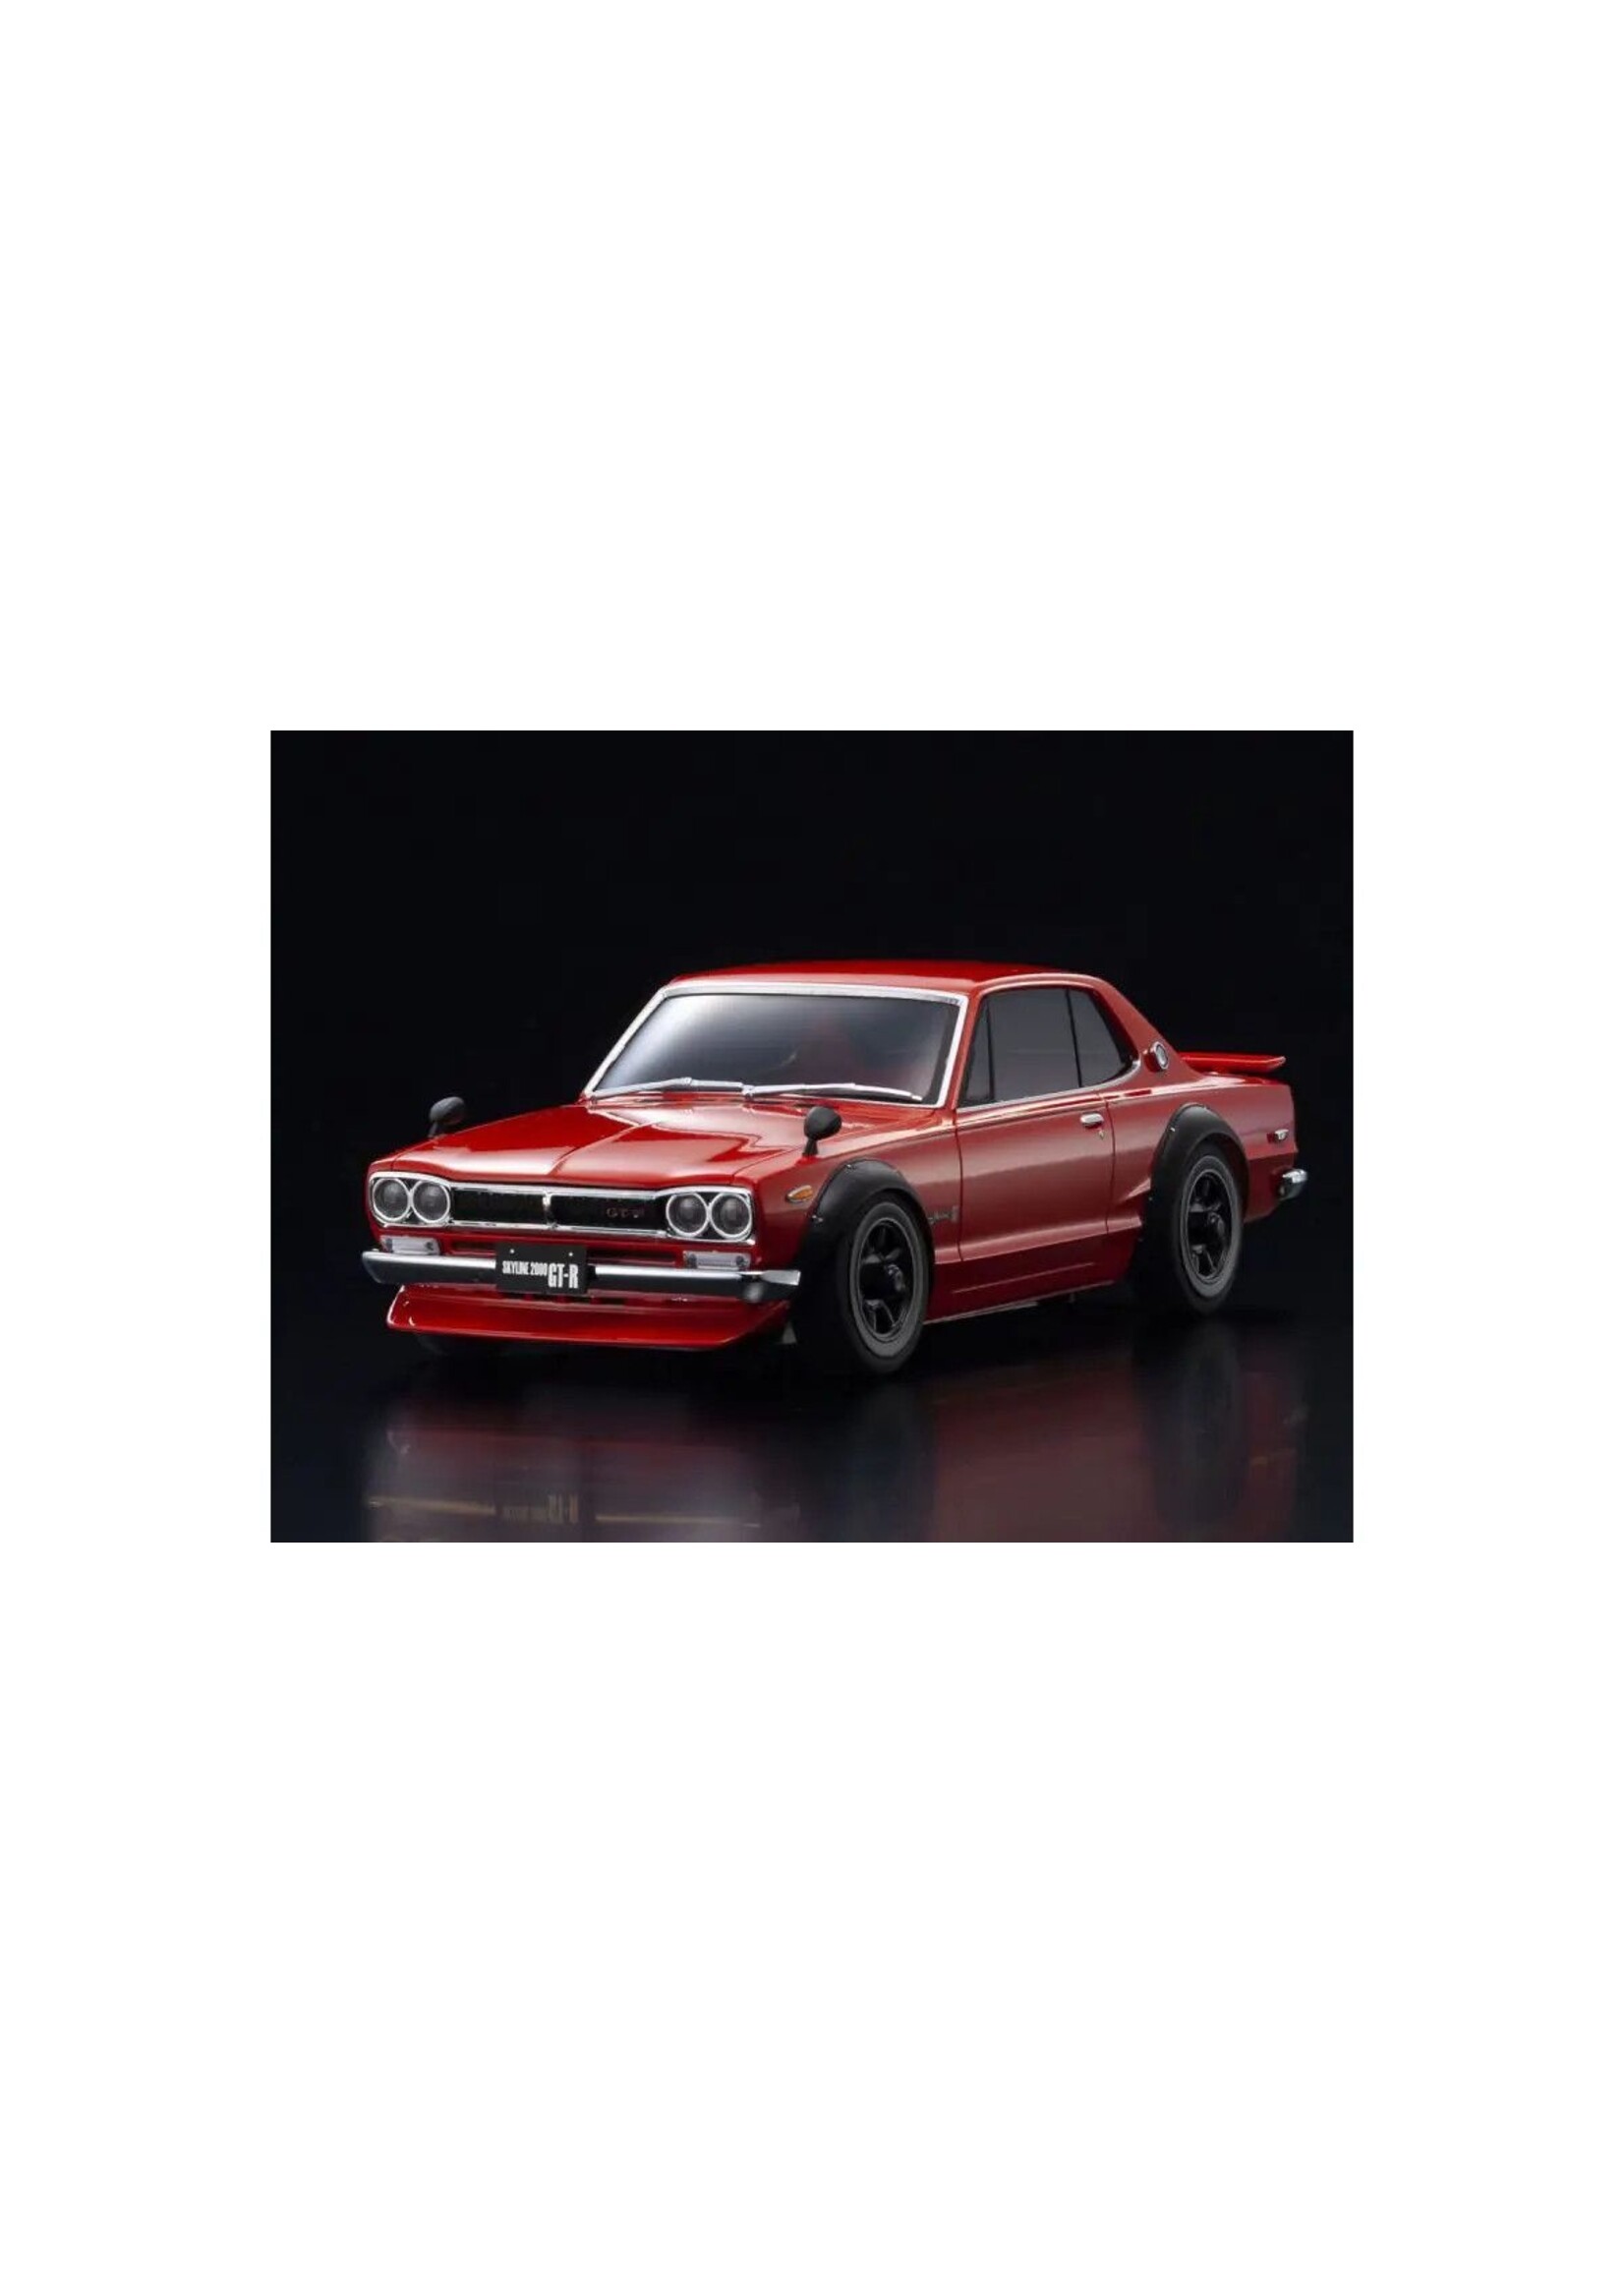 Kyosho Nissan Skyline 2000GT-R KPGC10 Tuned Ver. 60th Anniversary Body - Red